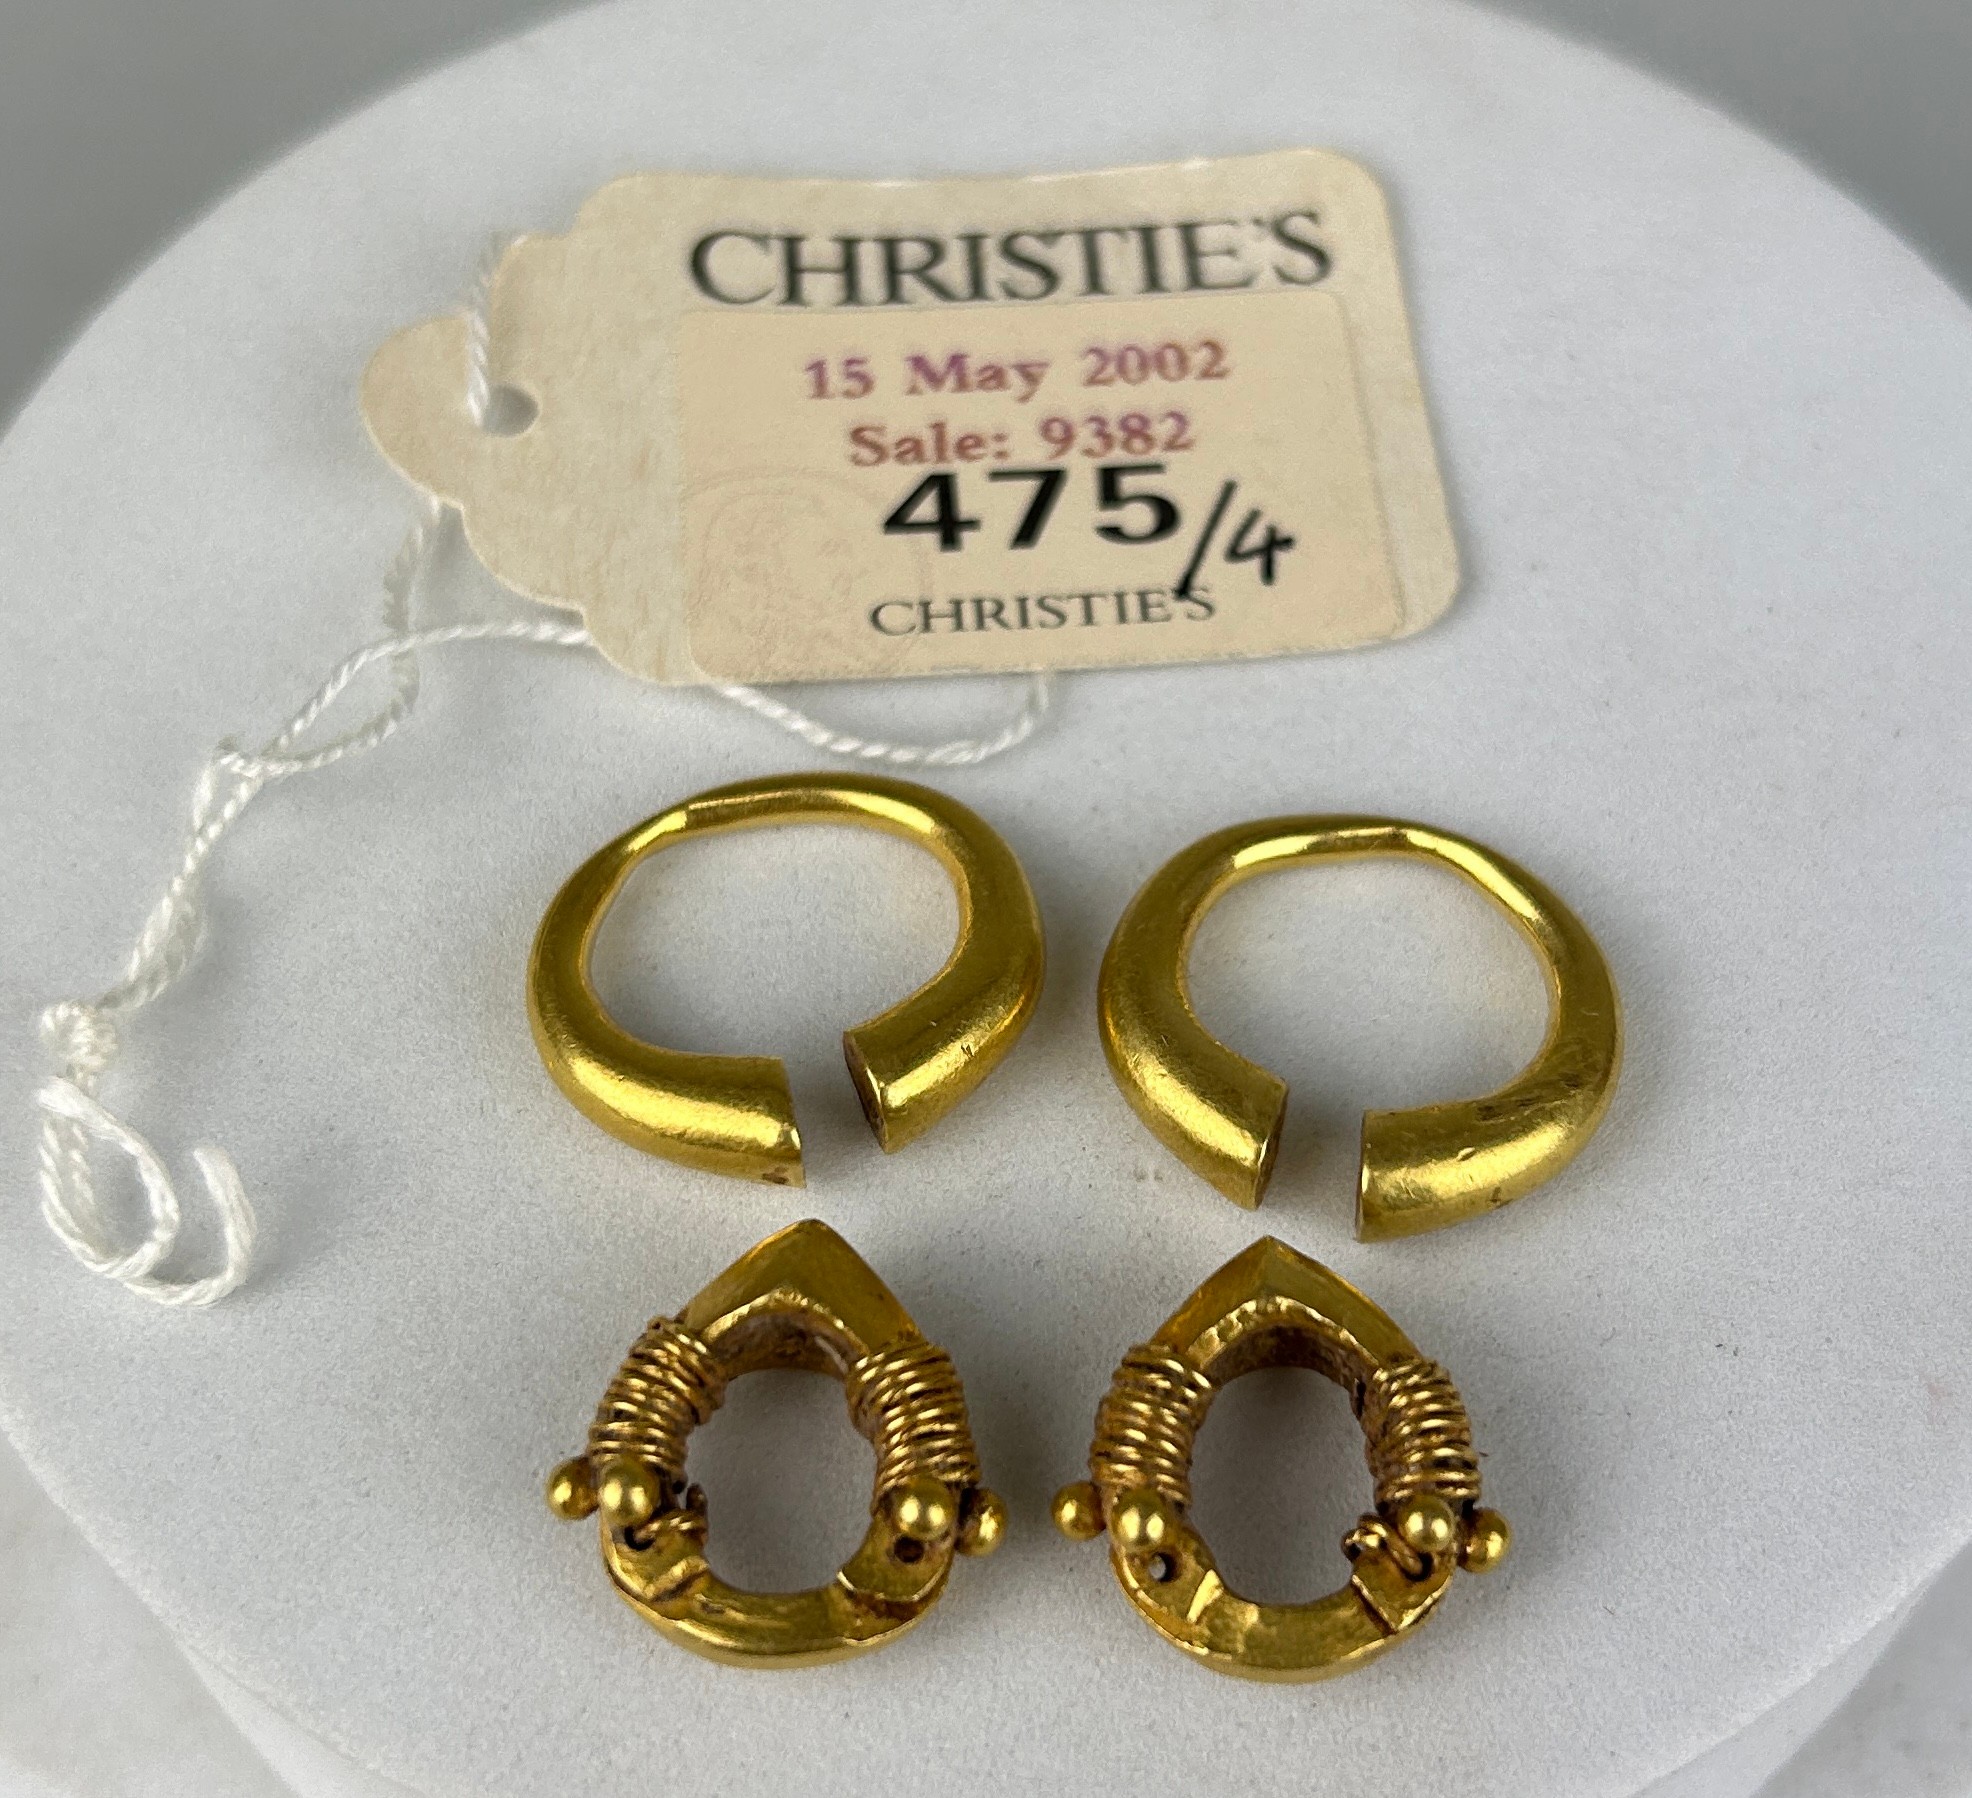 A PAIR OF PARTHIAN GOLD EARRINGS CIRCA 2ND CENTURY B.C. / A.D. ALONG WITH A PAIR OF WESTERN